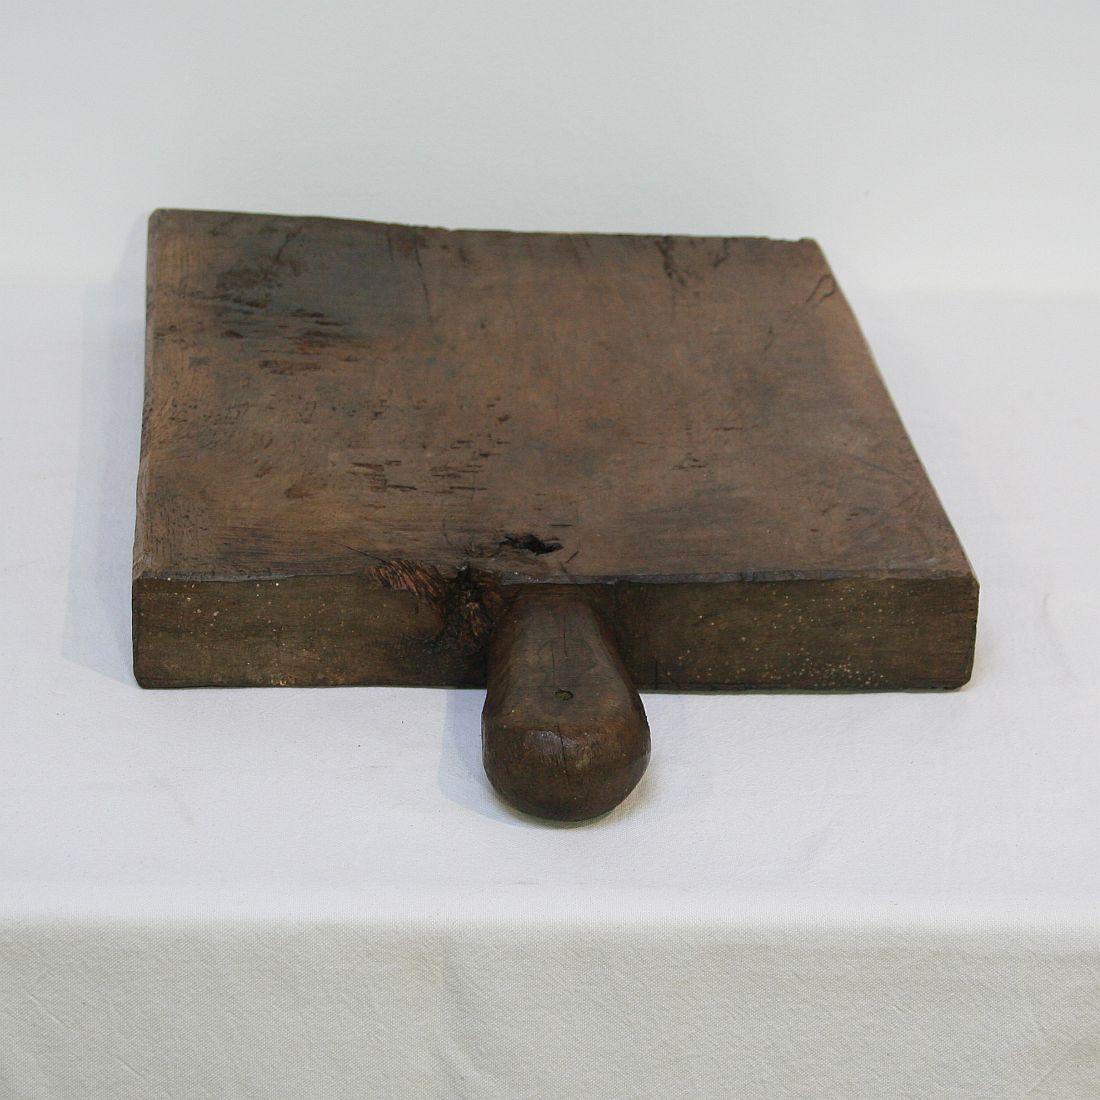 Hand-Crafted French, 19th Century, Wooden Chopping or Cutting Board